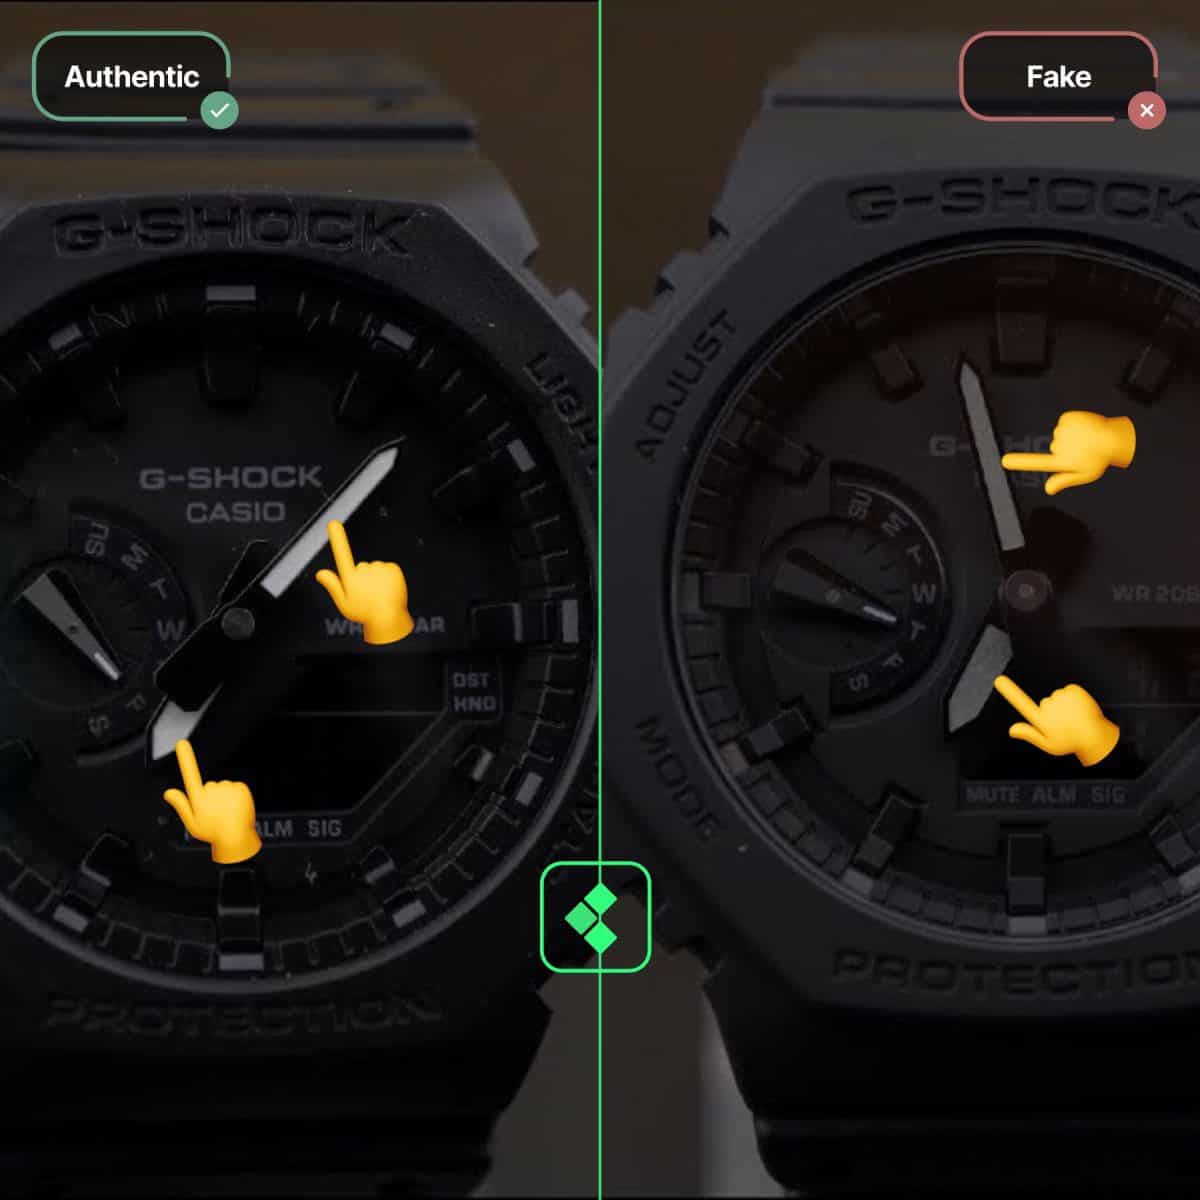 Difference Between Original G Shock And Fake | lupon.gov.ph